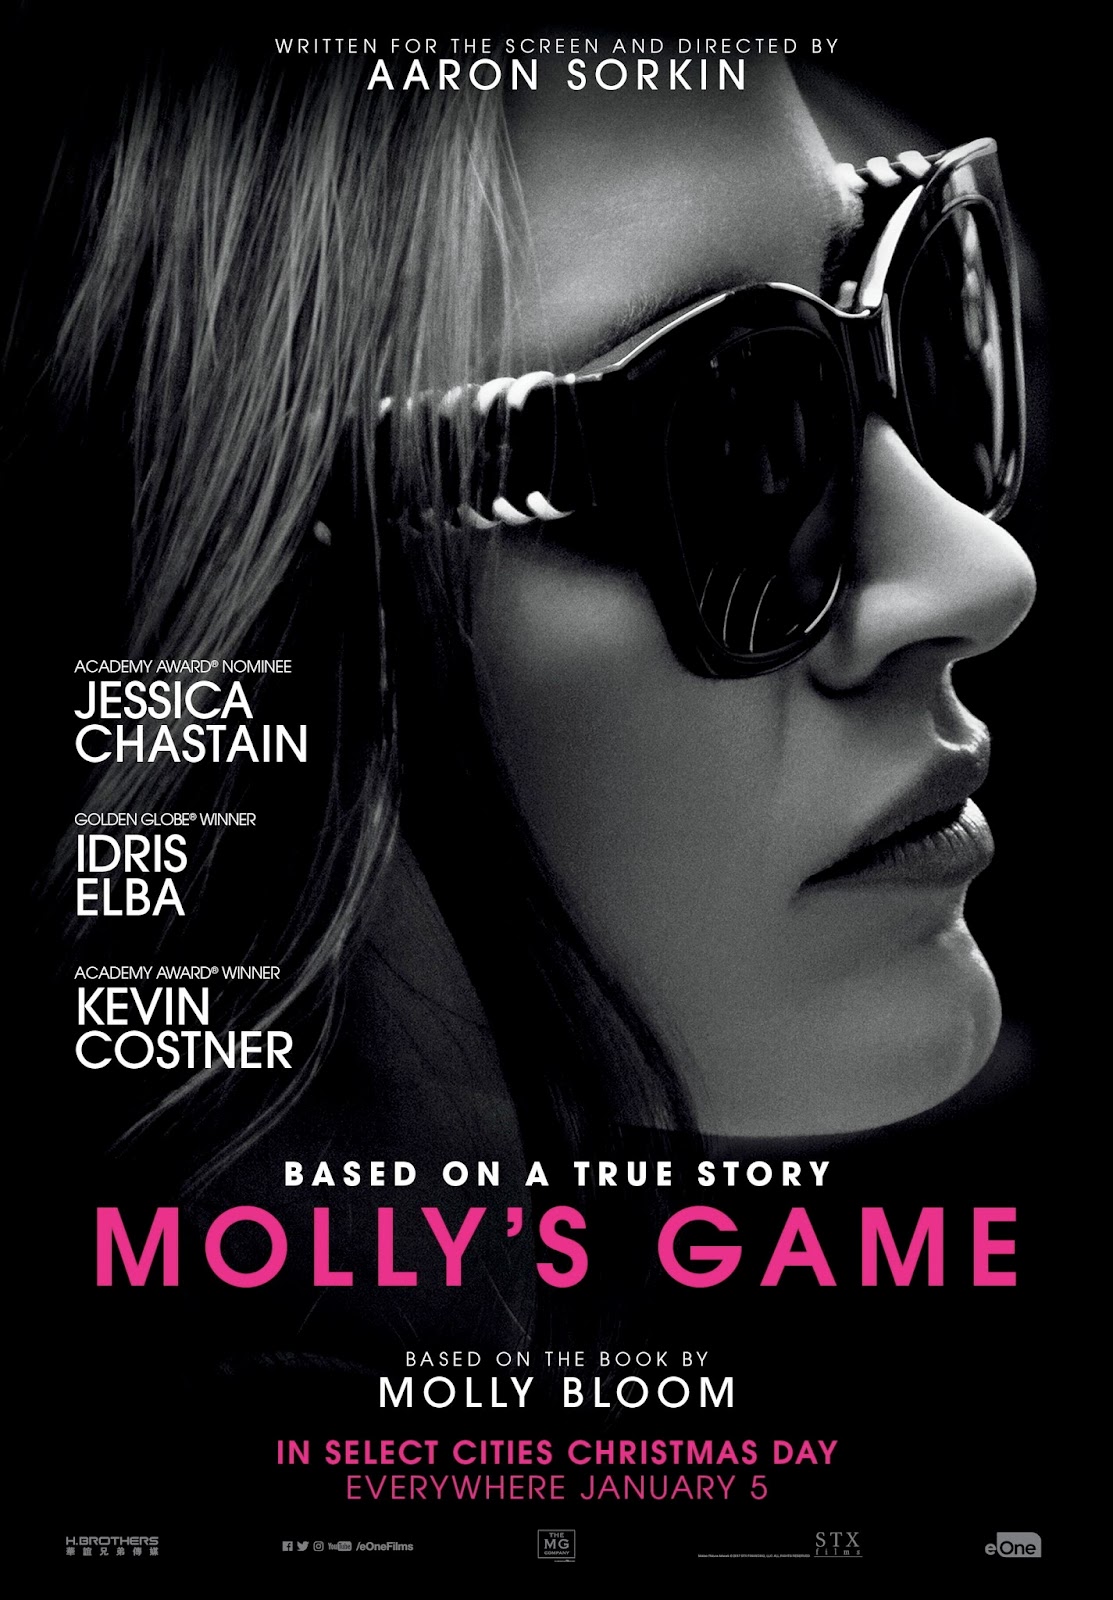 Molly’s Game – The Directorial Debut of Aaron Sorkin!